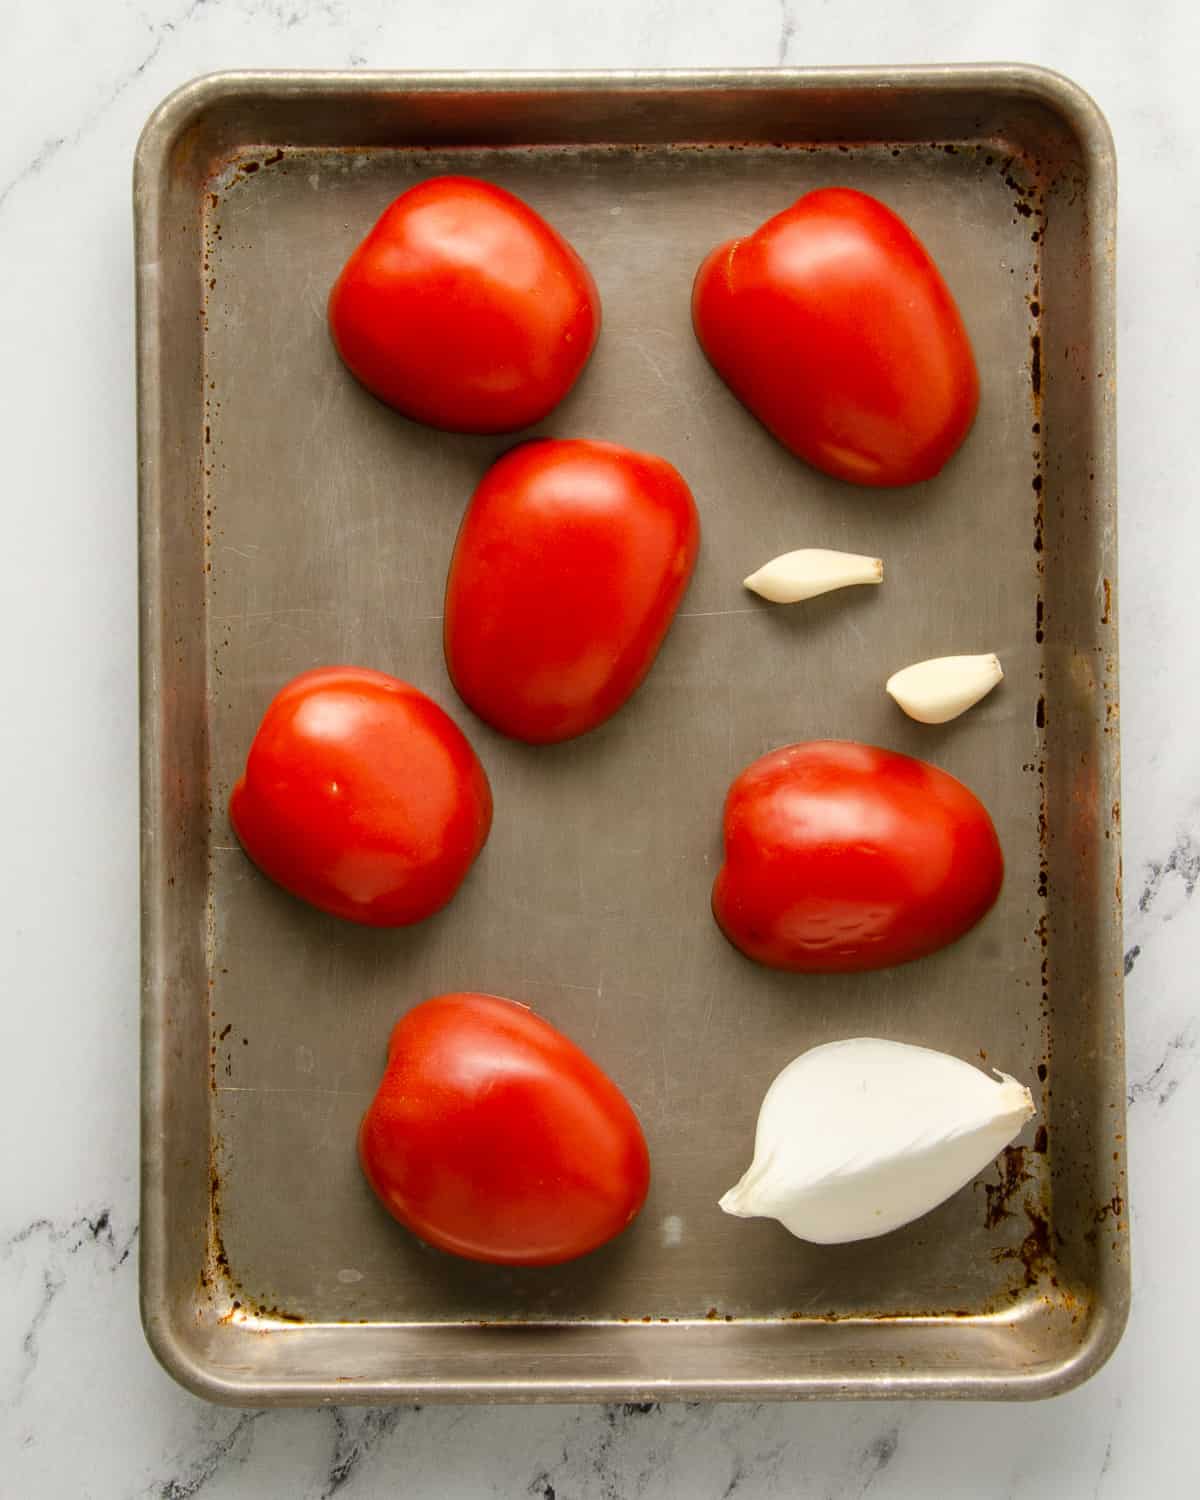 Roma tomato halves on a sheet tray with a quarter white onion and two garlic cloves.